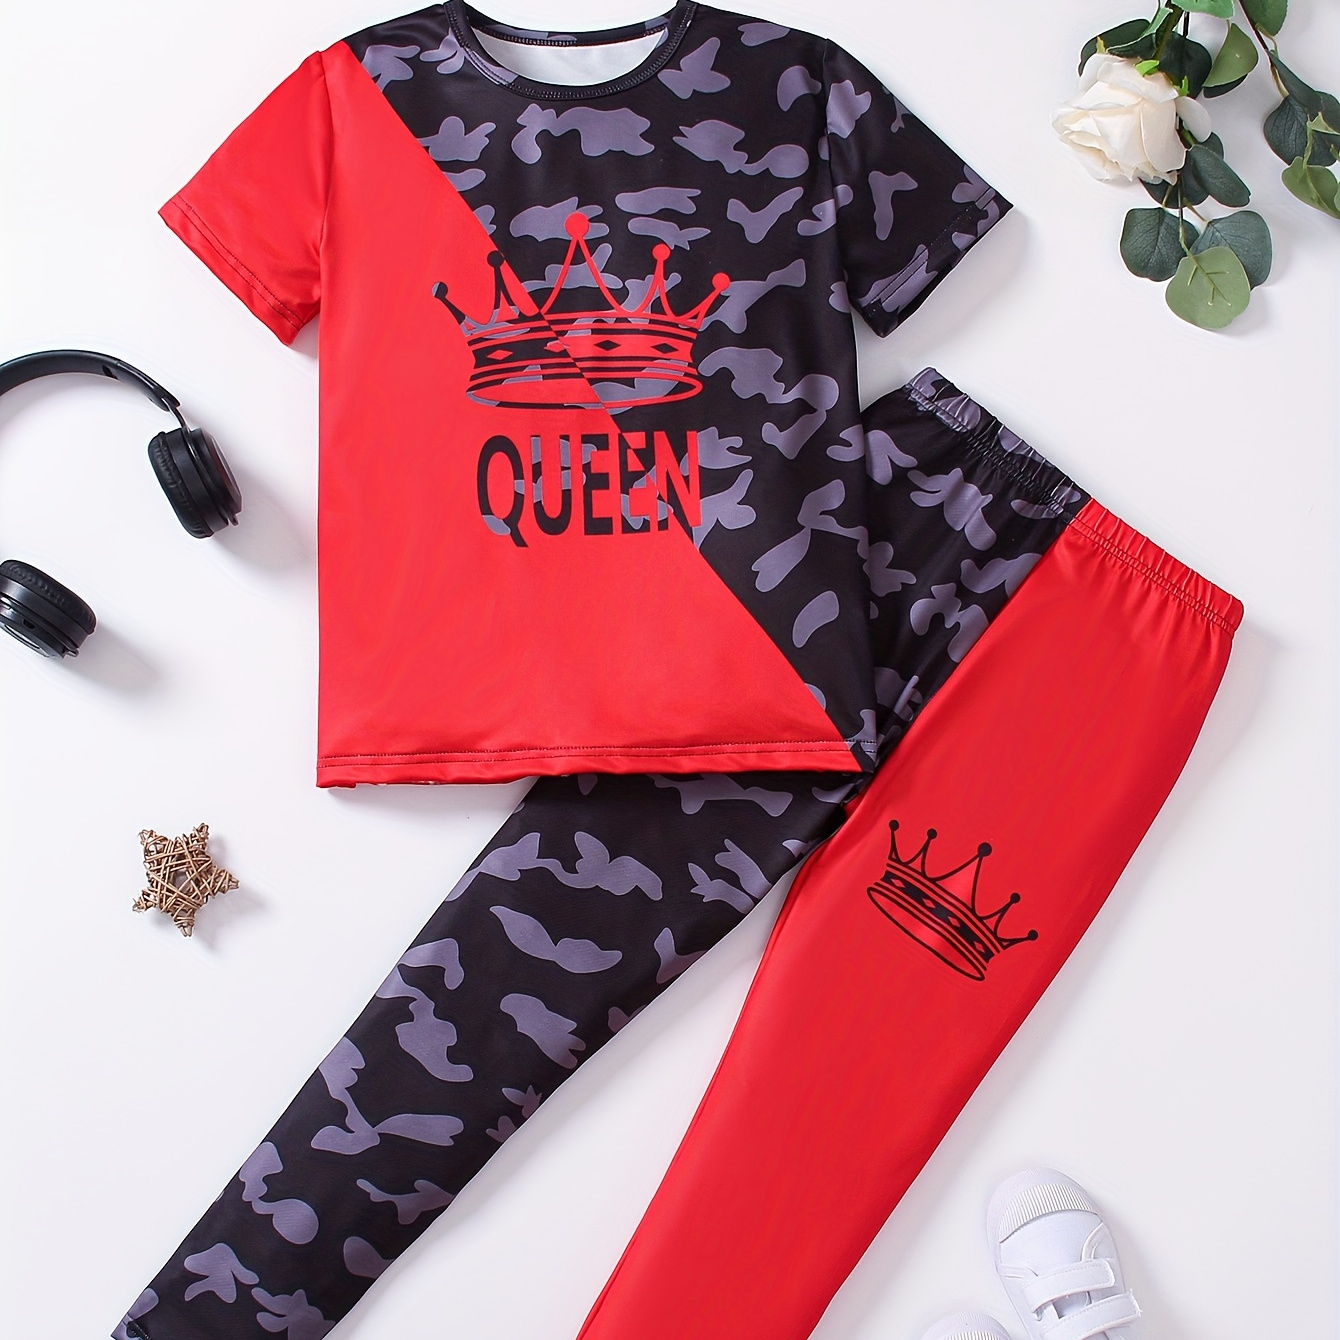 

Girl's 2-piece Queen & Crown Color Block T-shirt + Pants Co-ords Set - Sweet Fashion Girls Spring/ Summer Outfit